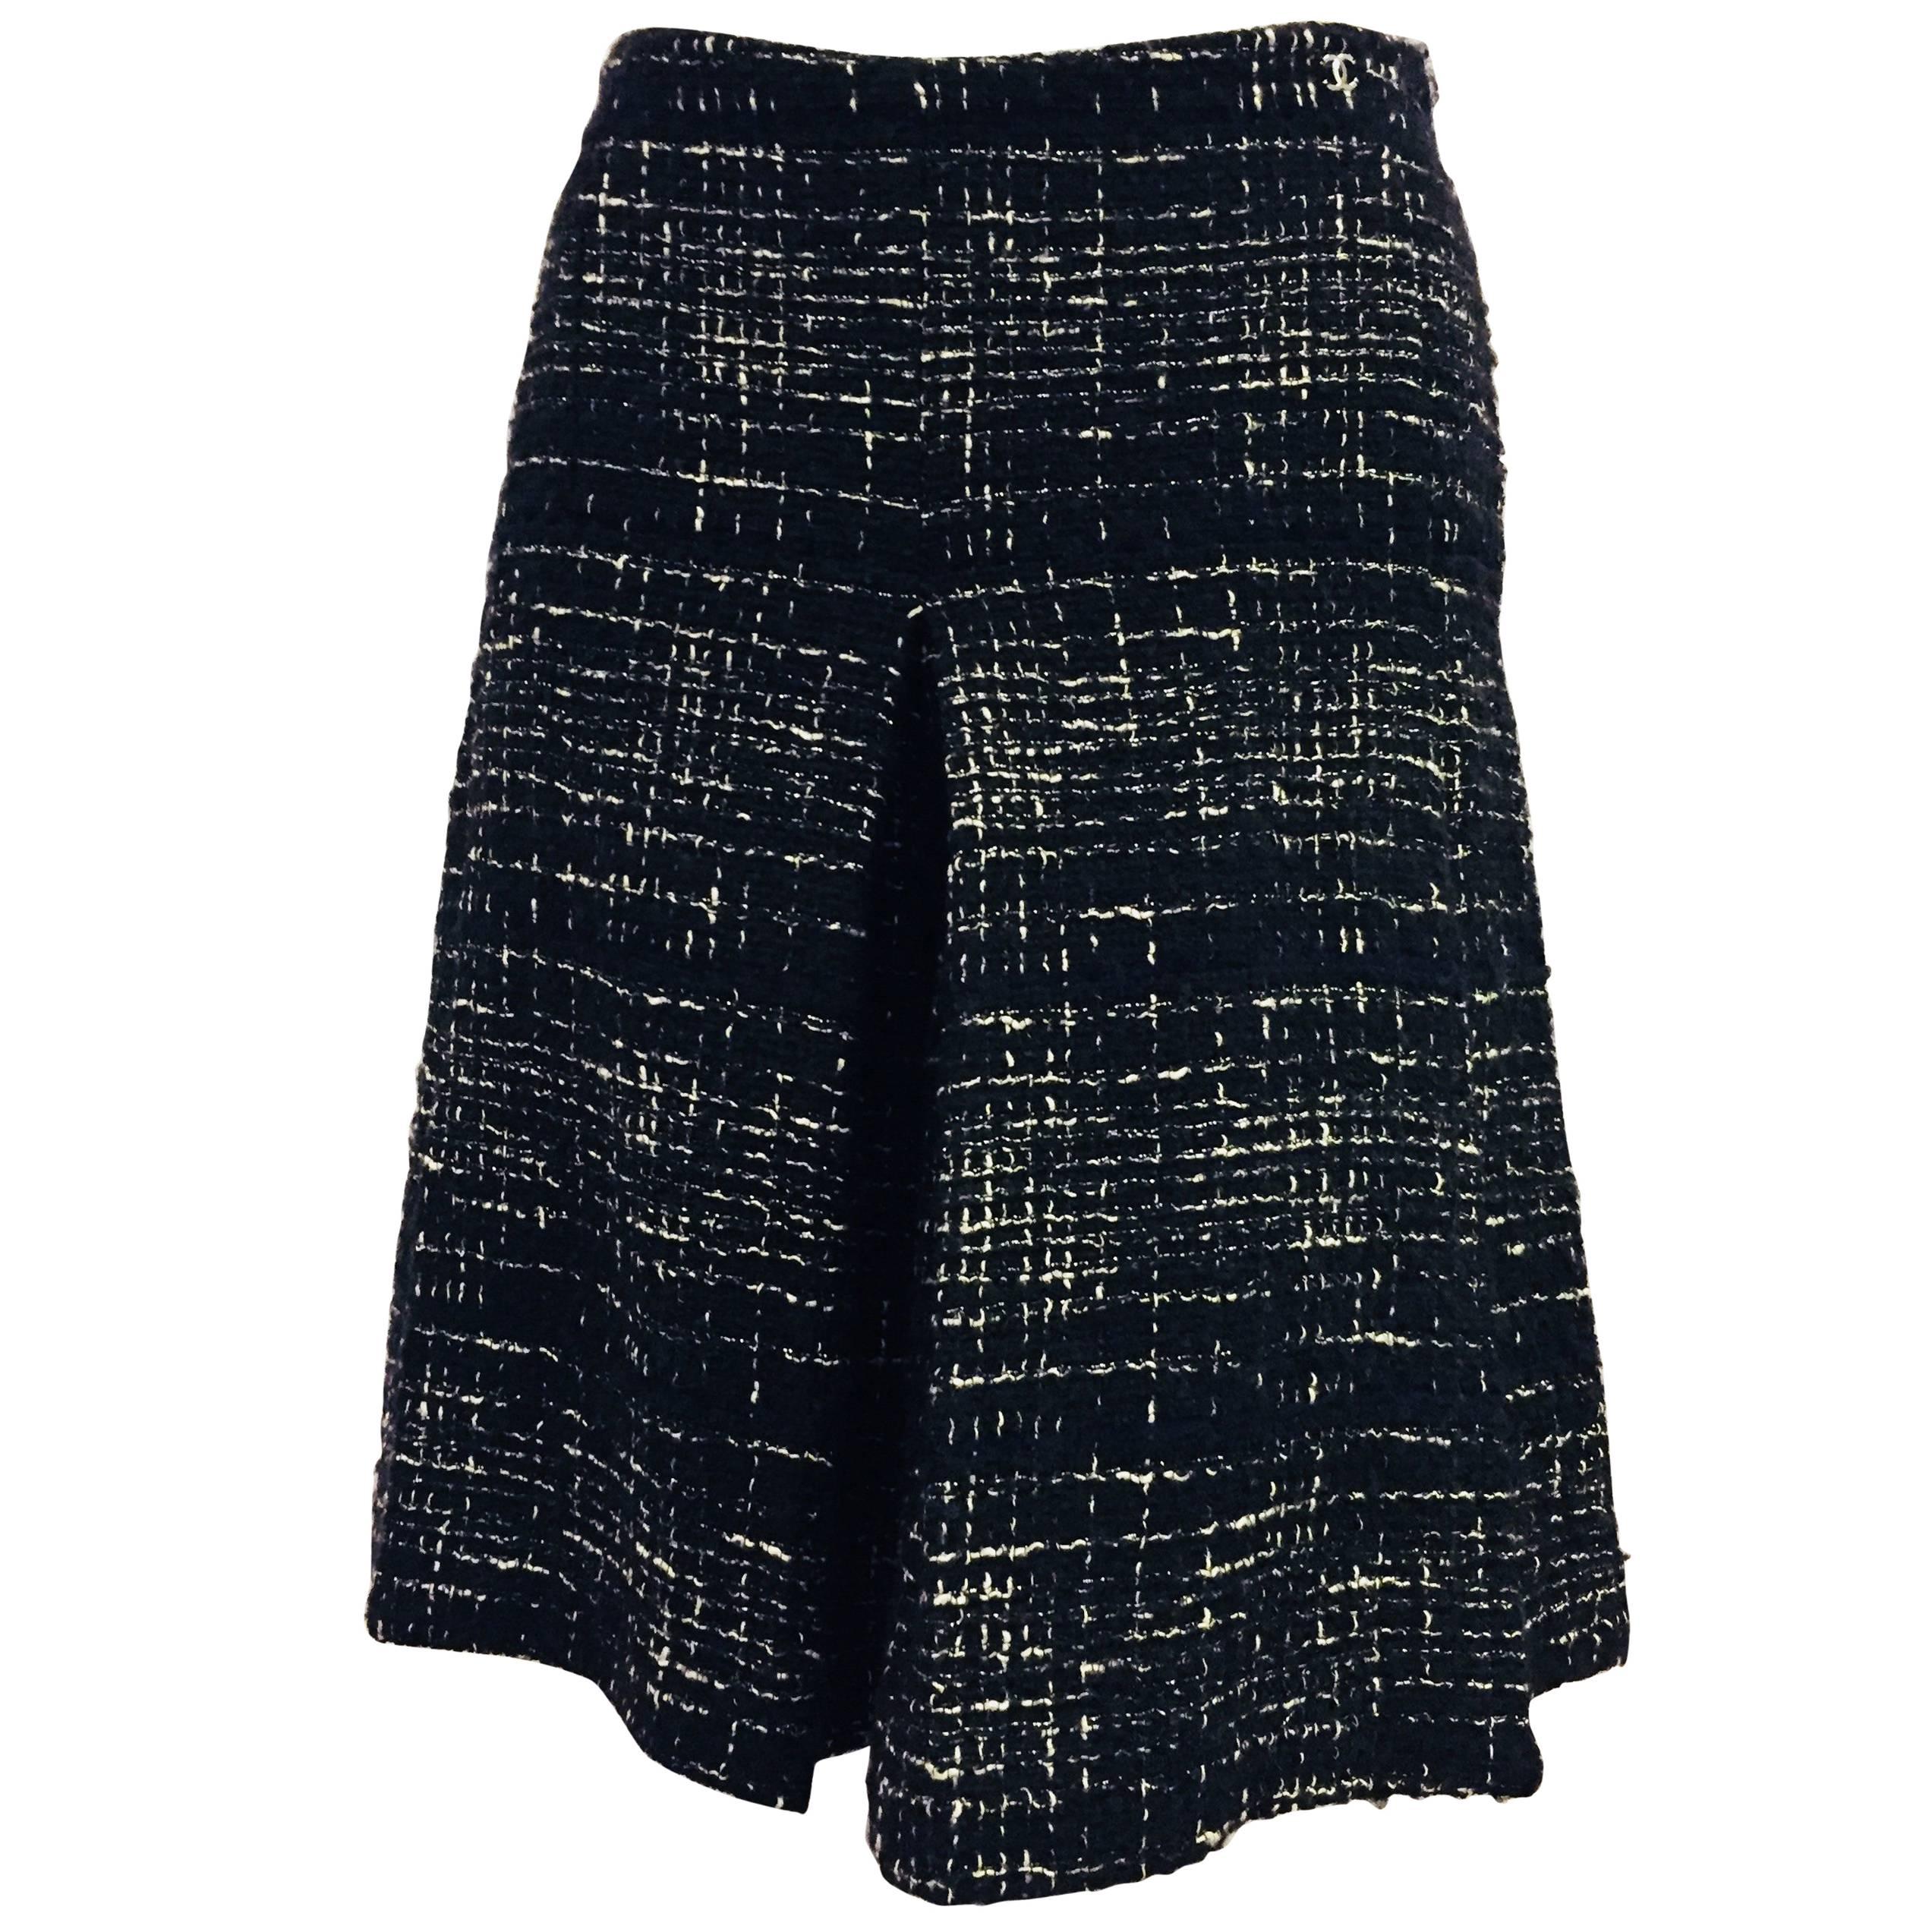 Chanel Black and White Wool Blend Tweed Culotte Skirt 